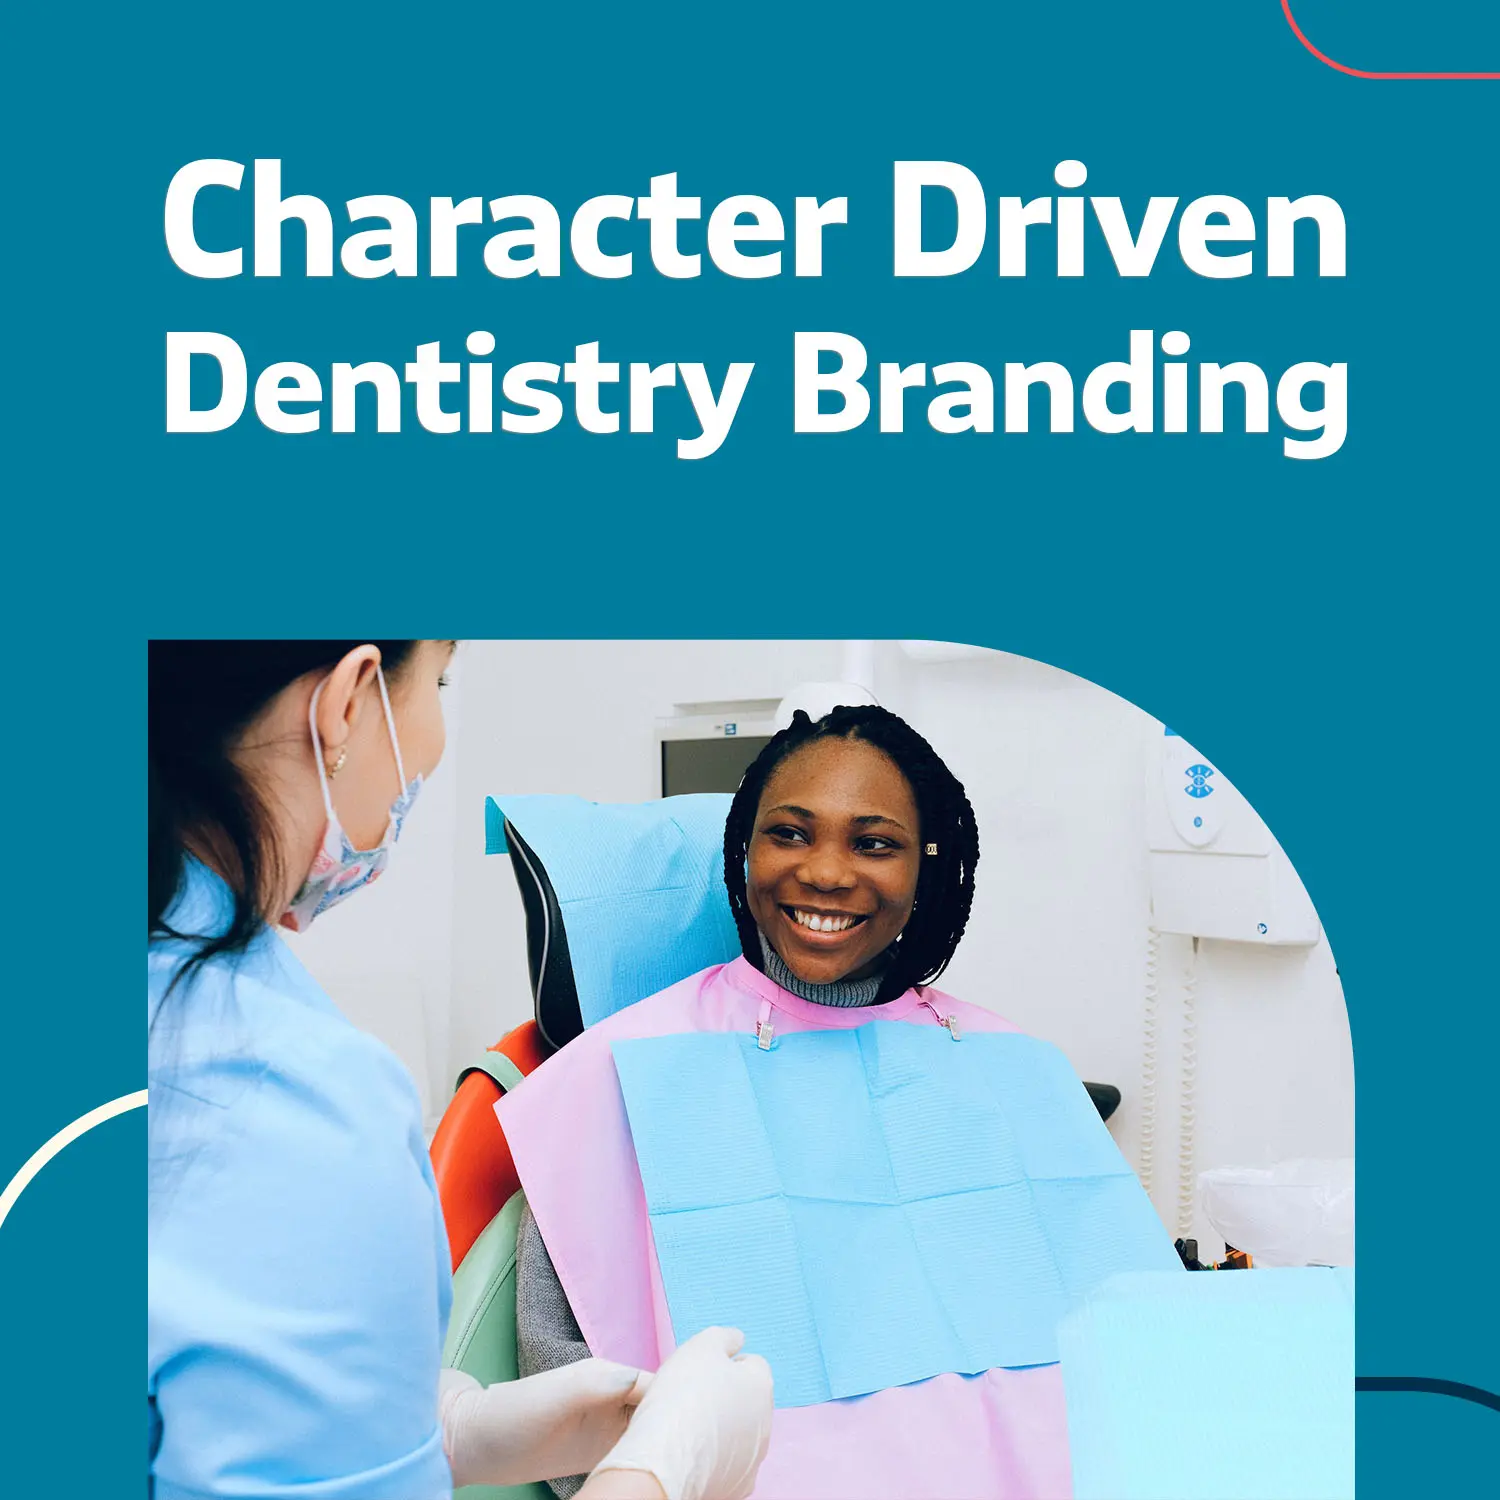 Character Driven Dentistry Brand